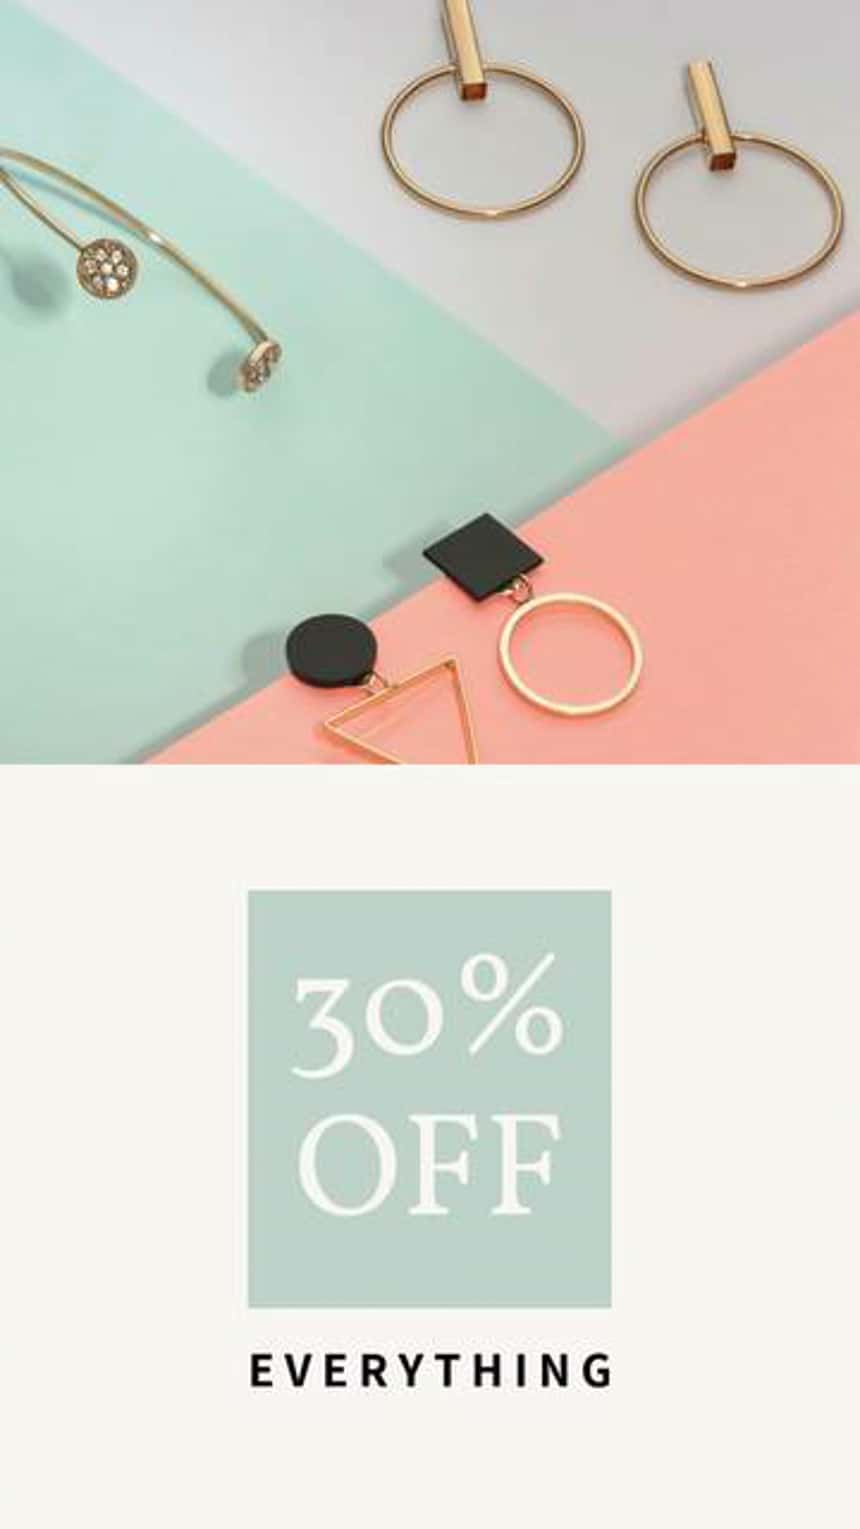 Facebook video ad template advertising a sale. The image shows various jewelry against a flat lay, and text reads \